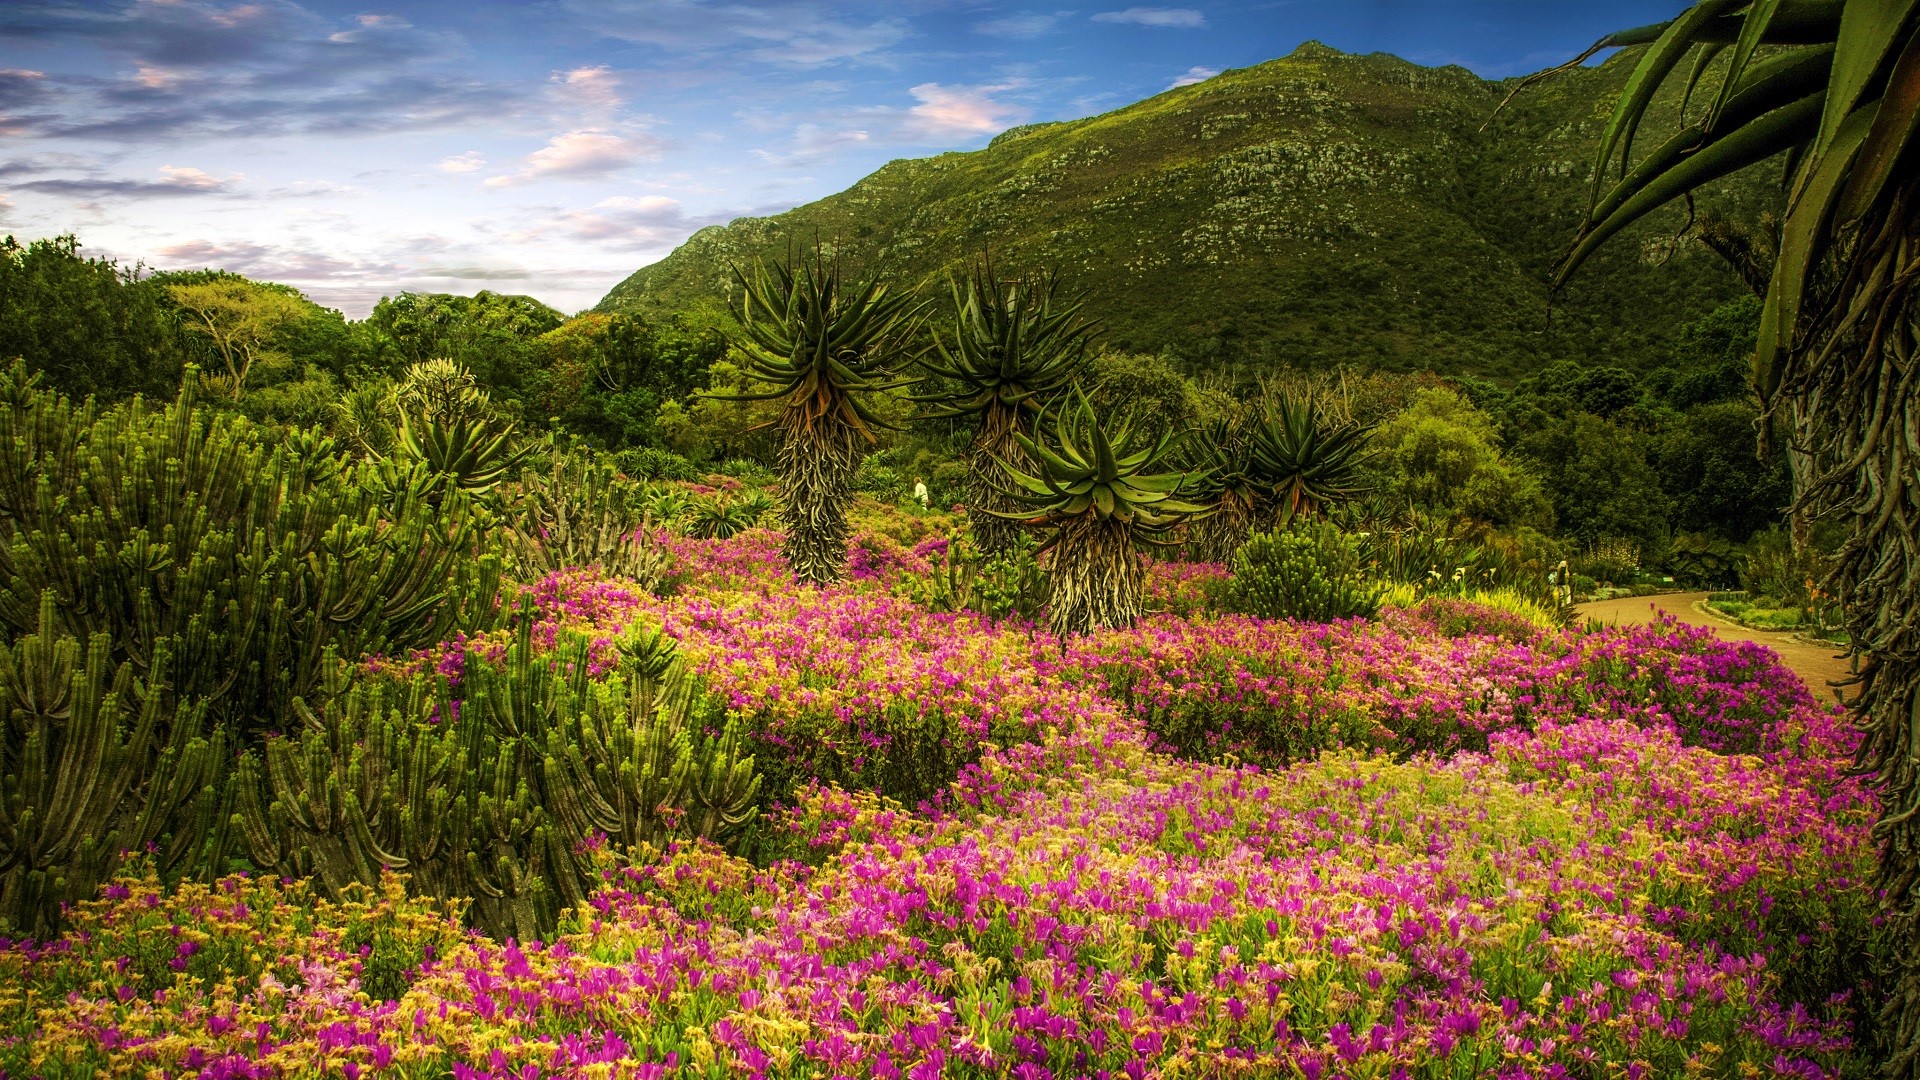 purple wildflowers, palms and grassy mountains on the South African garden trail